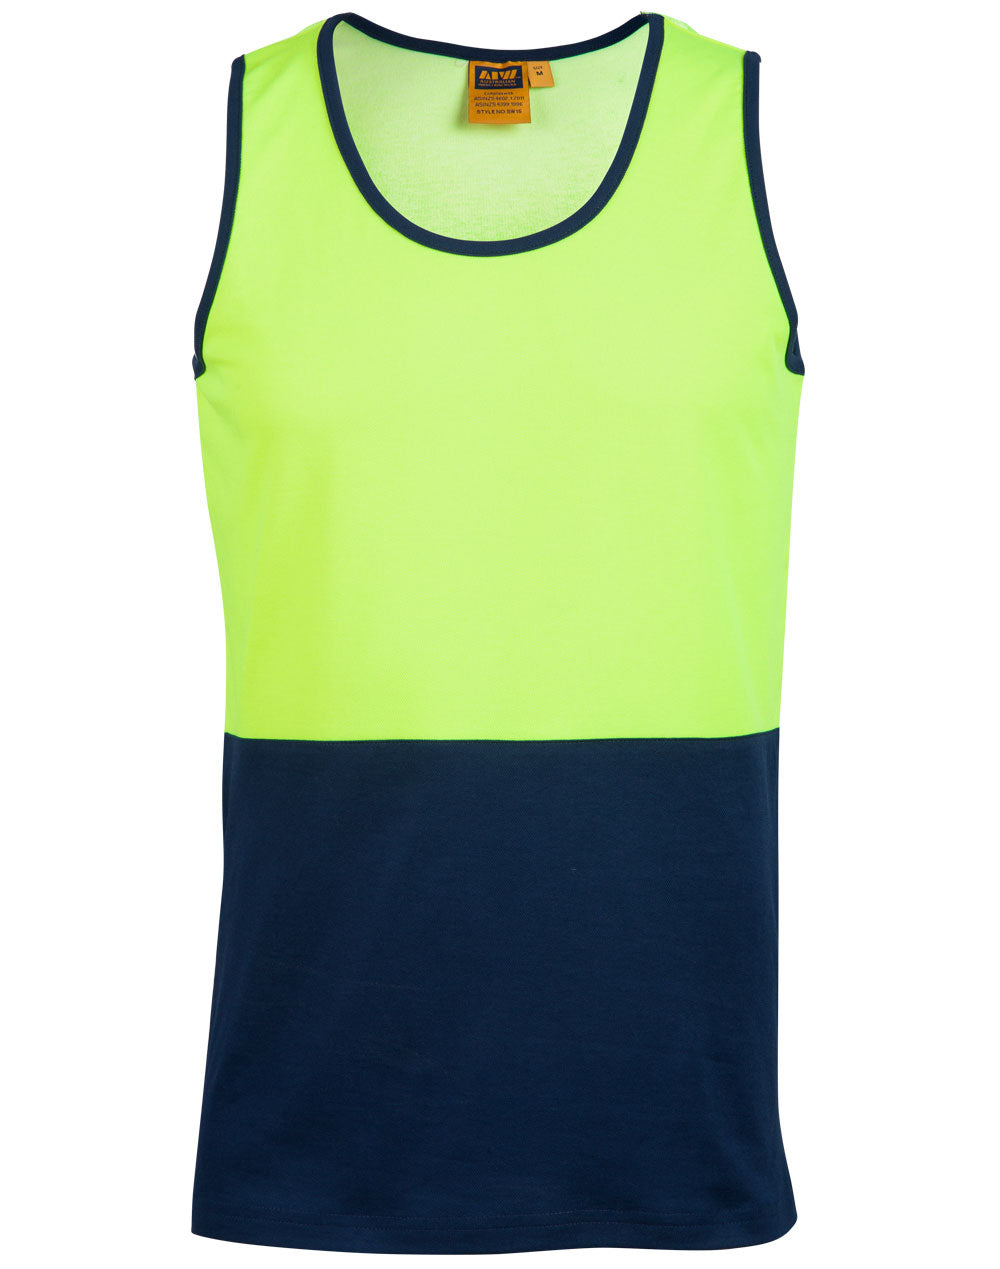 Hivis Truedry Singlet - made by AIW